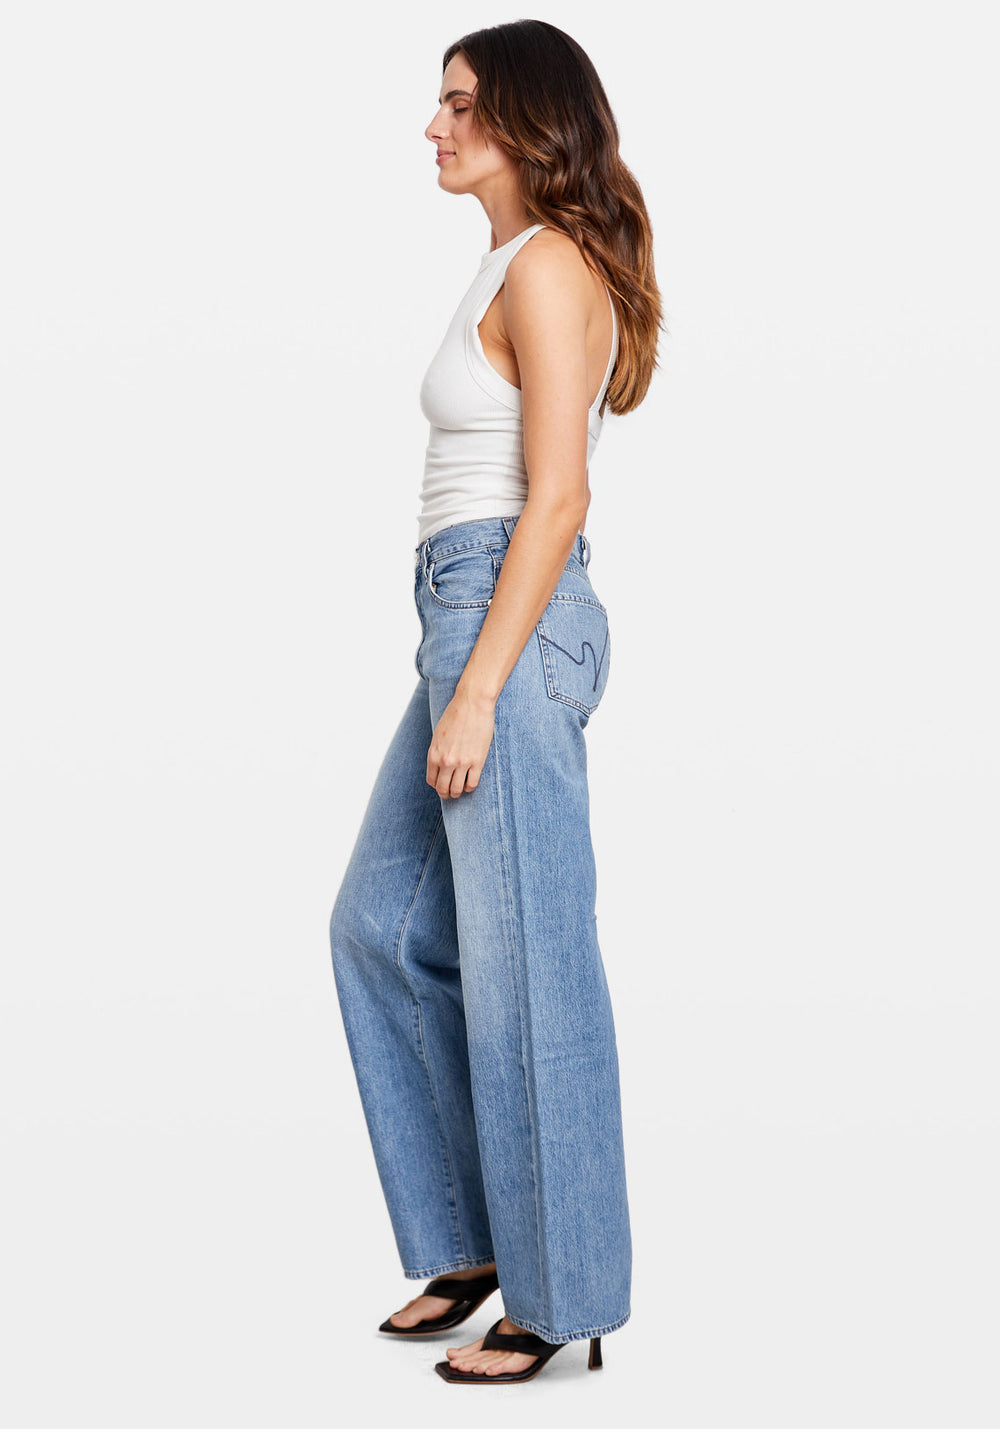 TIORU Jeans for Women Pants Women's Jeans Pants for wome Washed